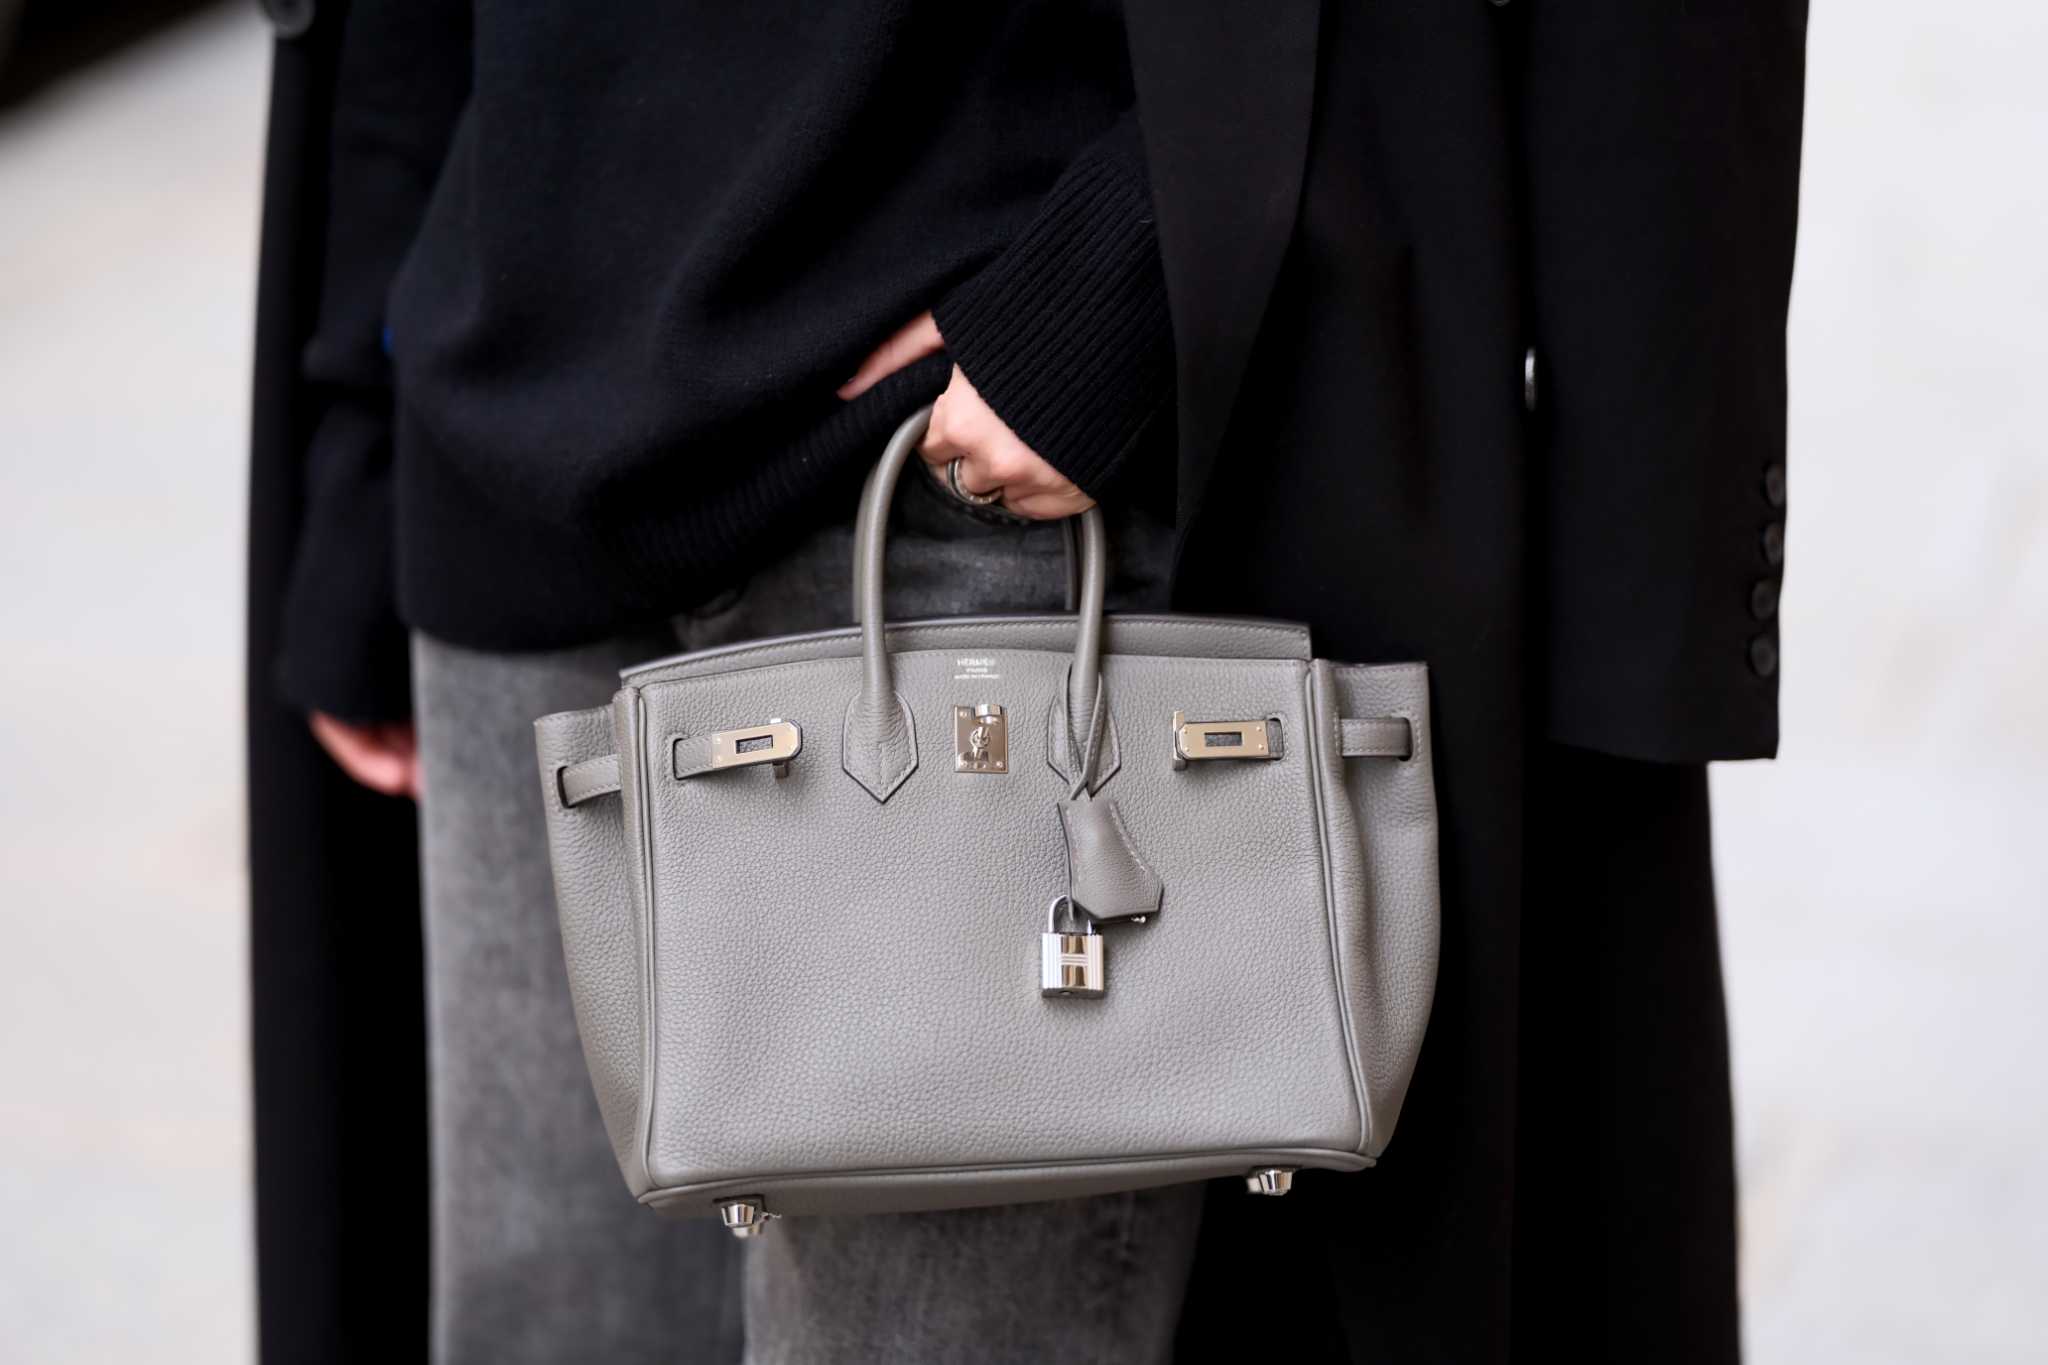 Customers who weren’t allowed to buy Birkin bags are suing Hermès